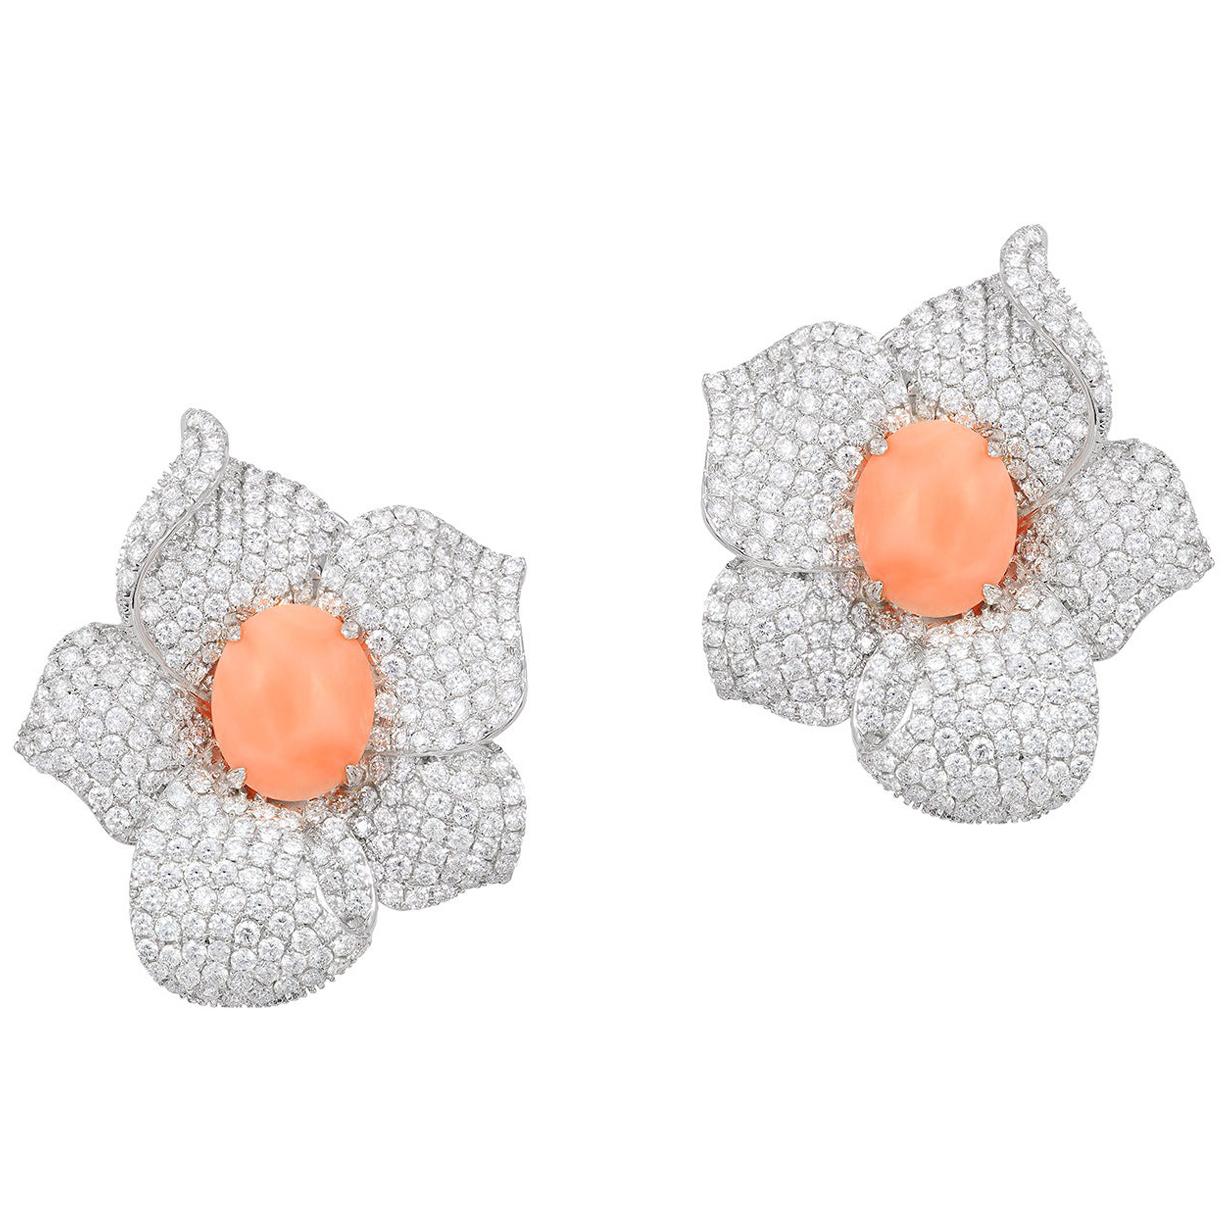 Andreoli White Gold, Diamond and Natural Coral Flower Earrings